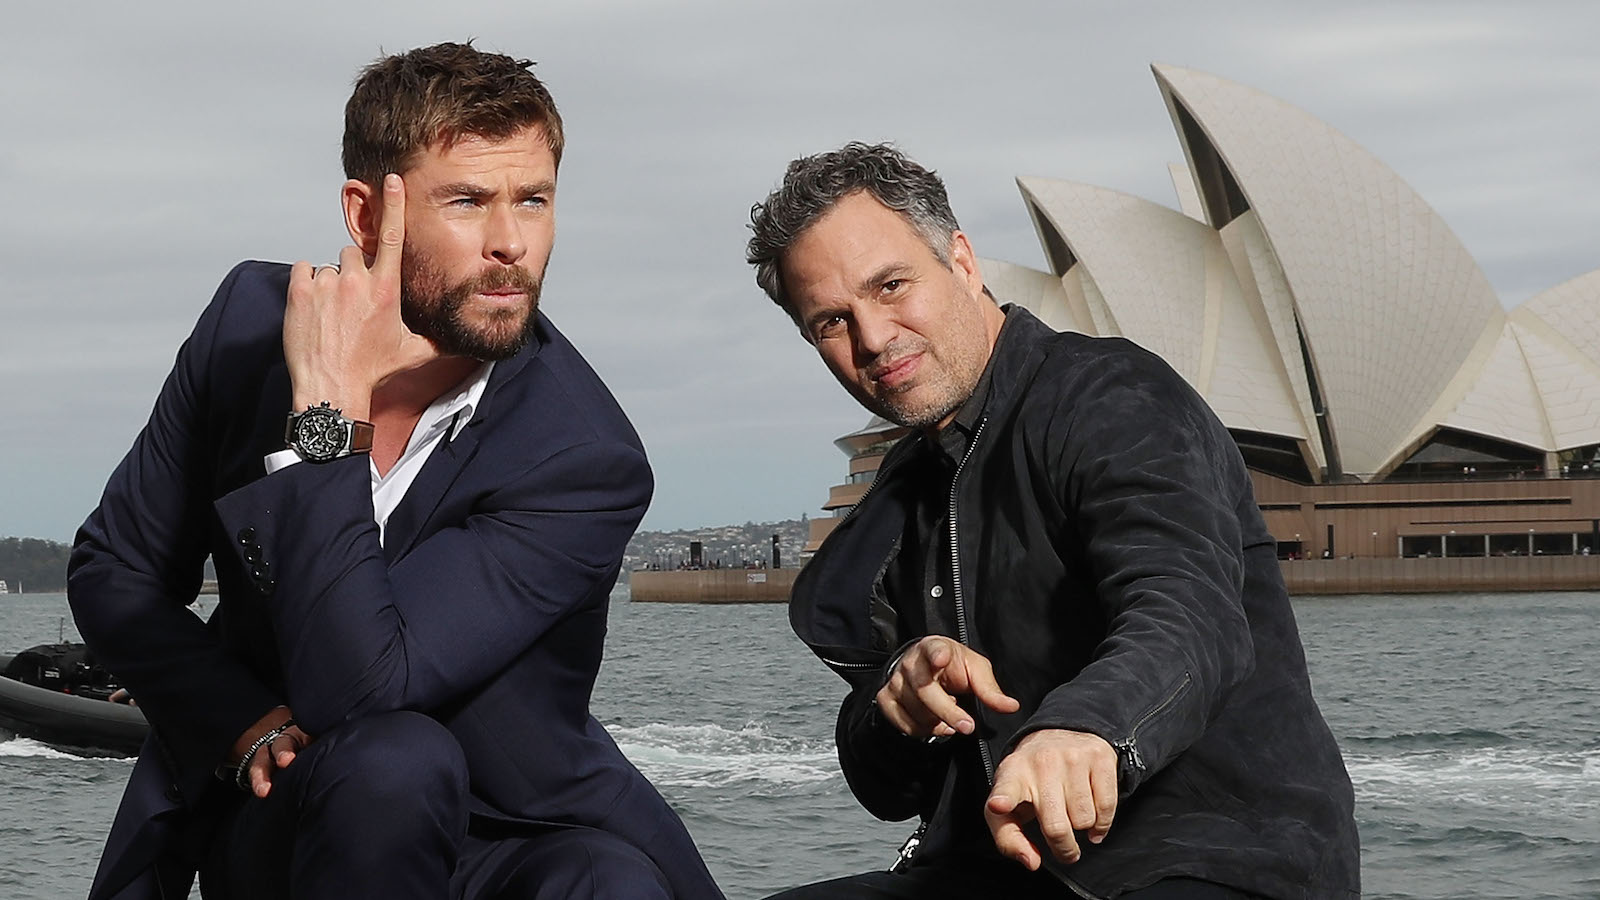 Chris Hemsworth and Mark Ruffalo pose in front of the Sydney Opera House